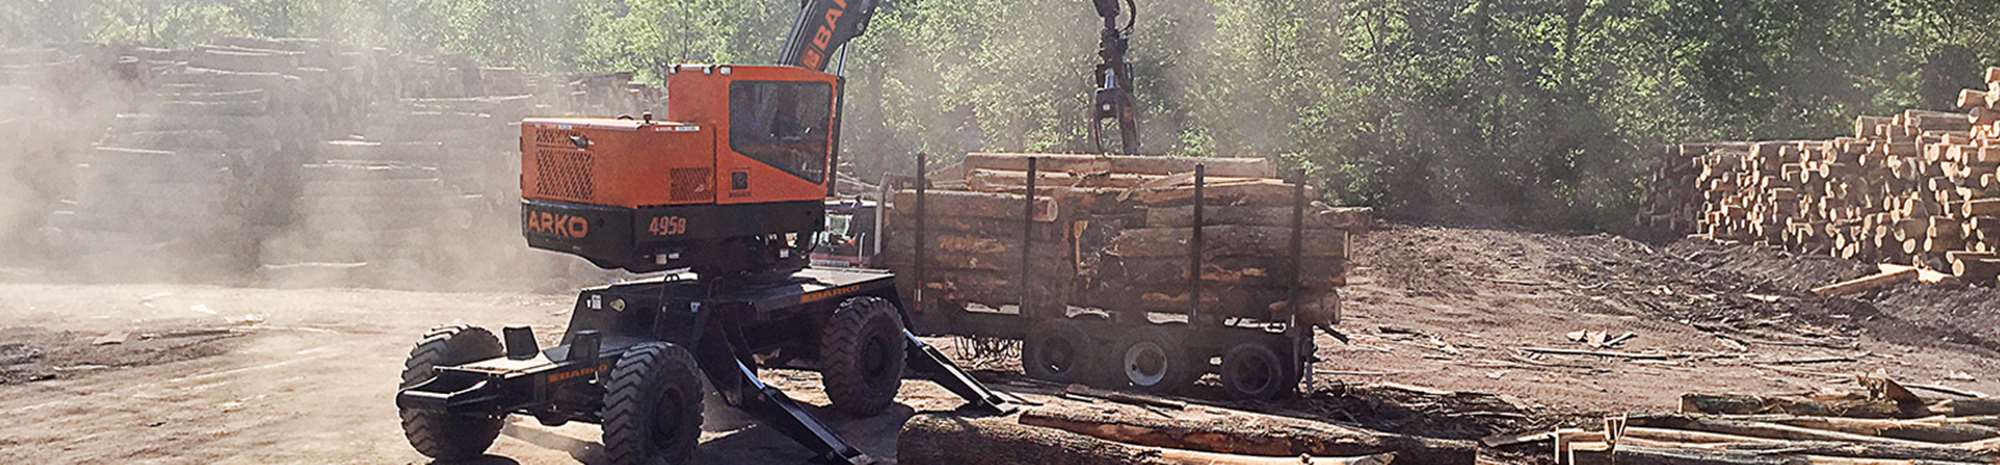 By-Industry-Banner-Forestry-1.jpg